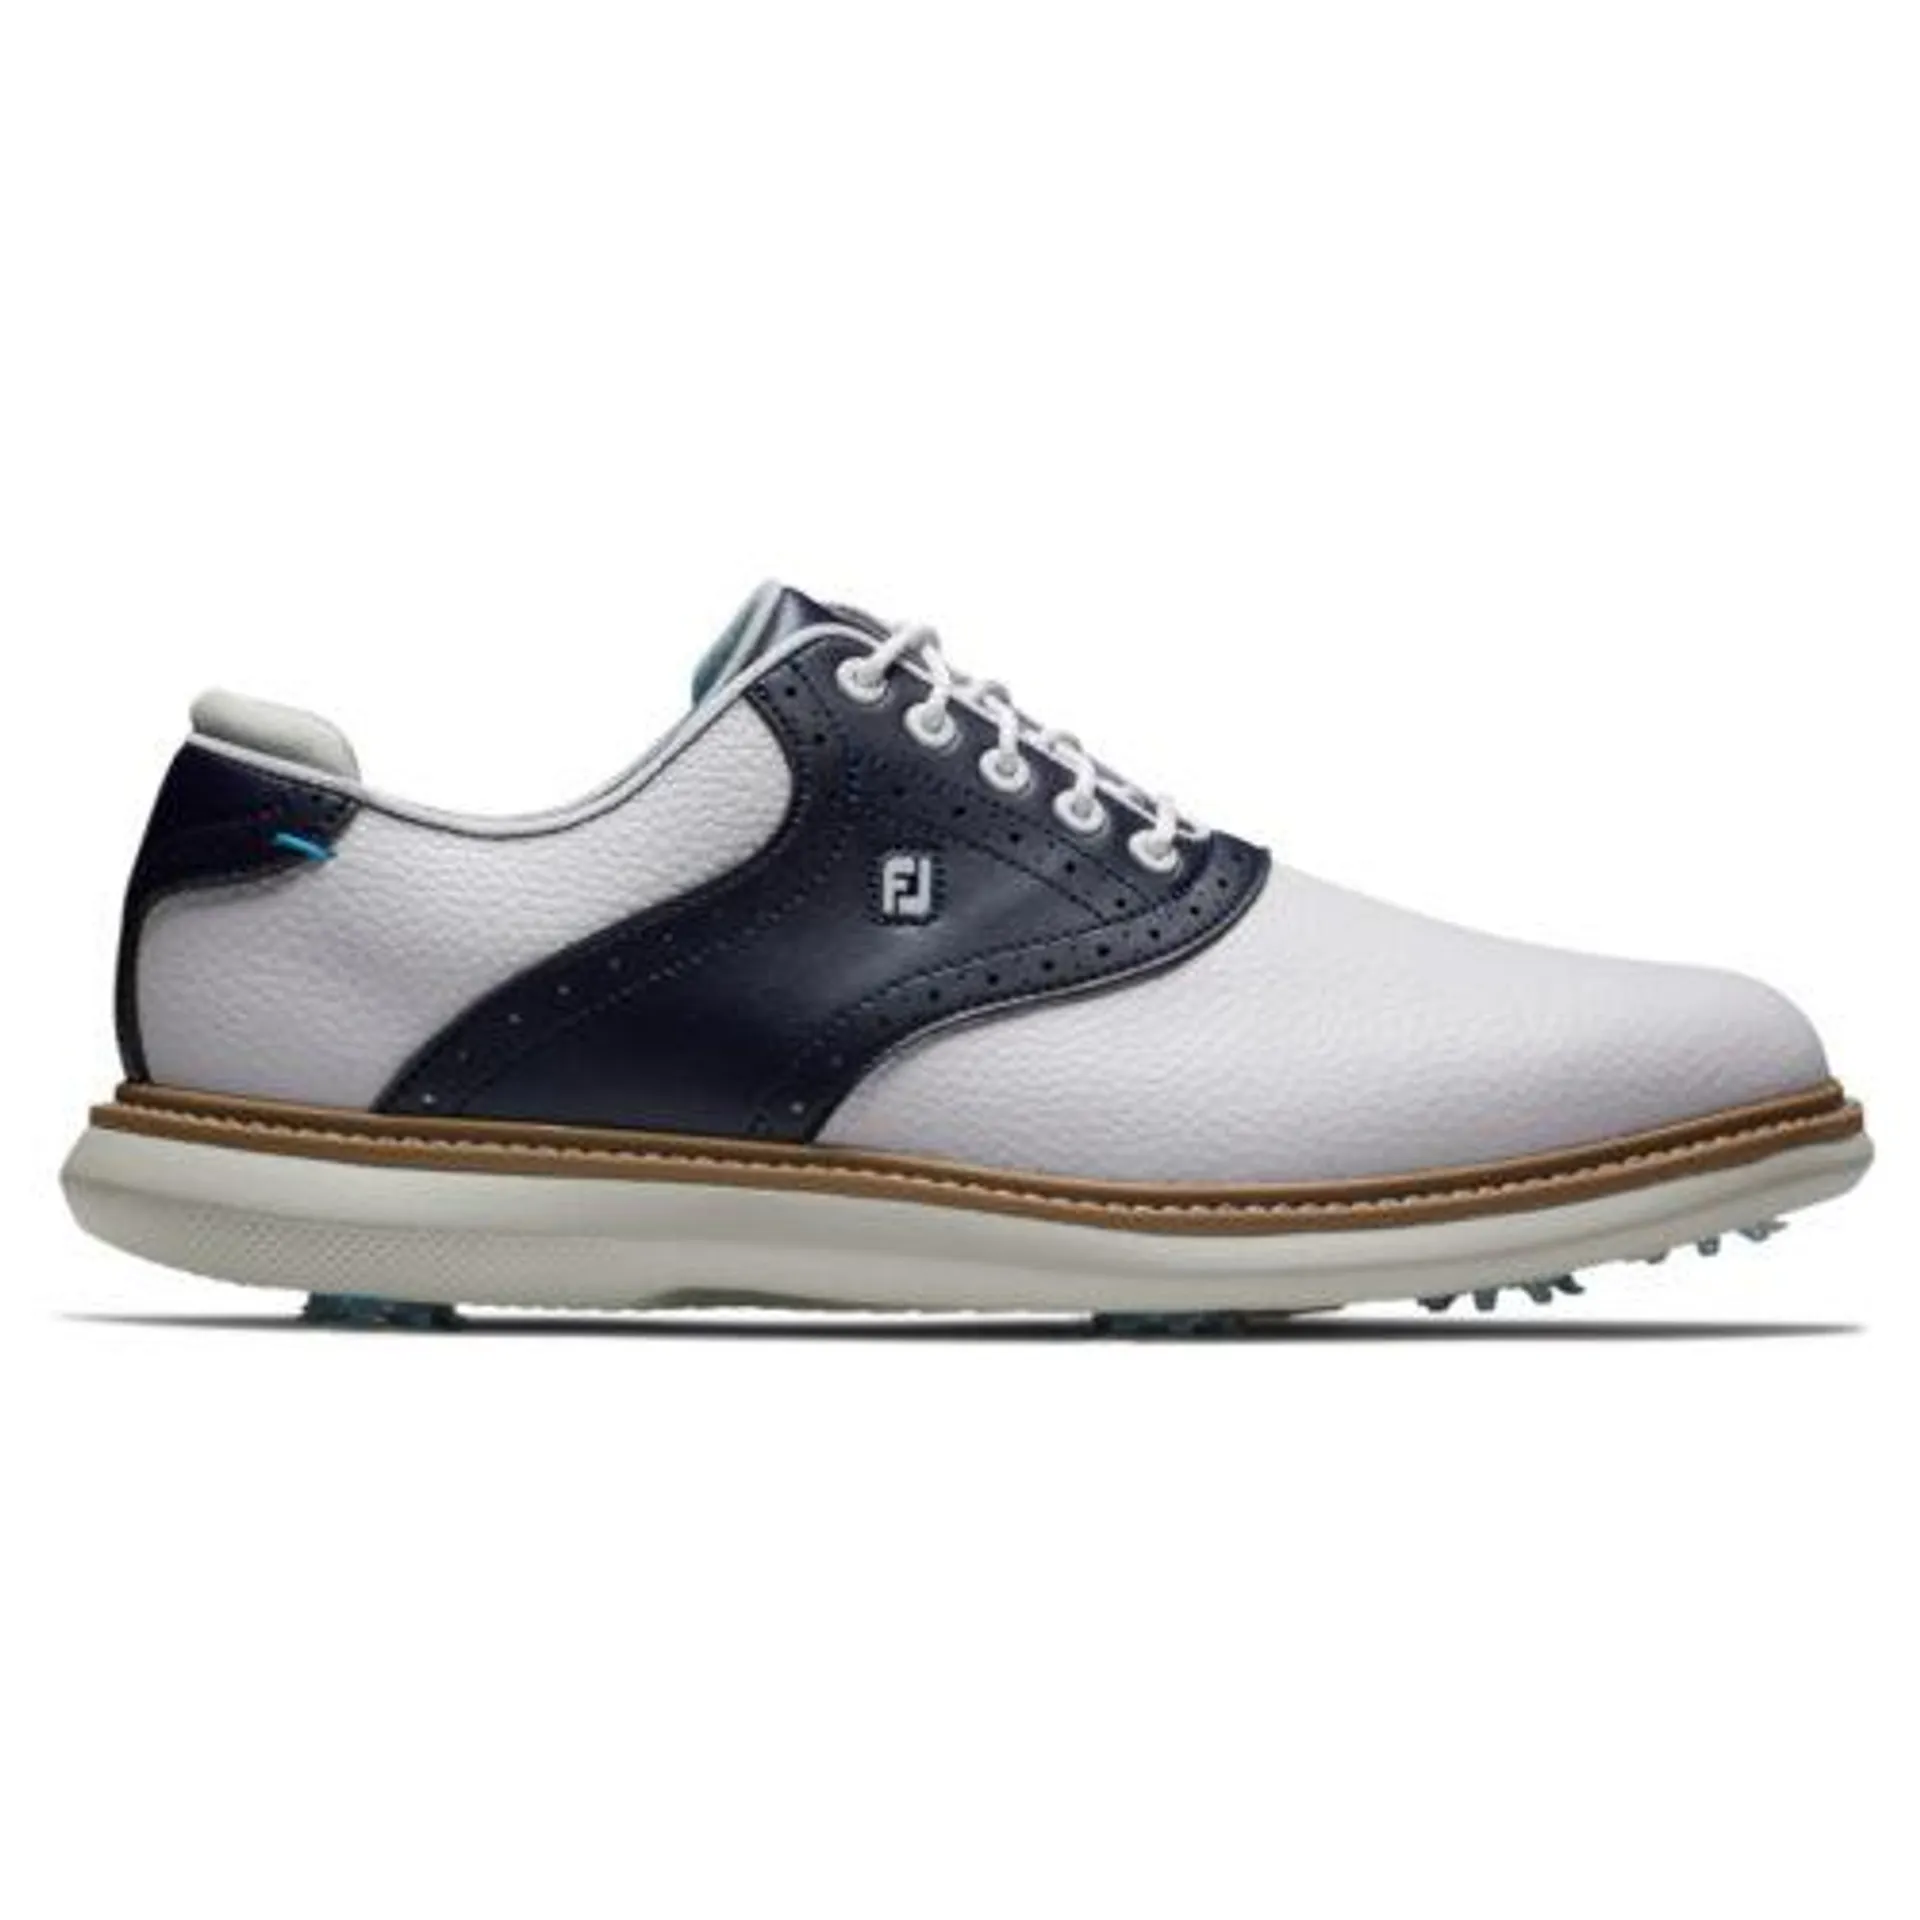 FootJoy Tradition Golf Shoes – White/Navy 57899